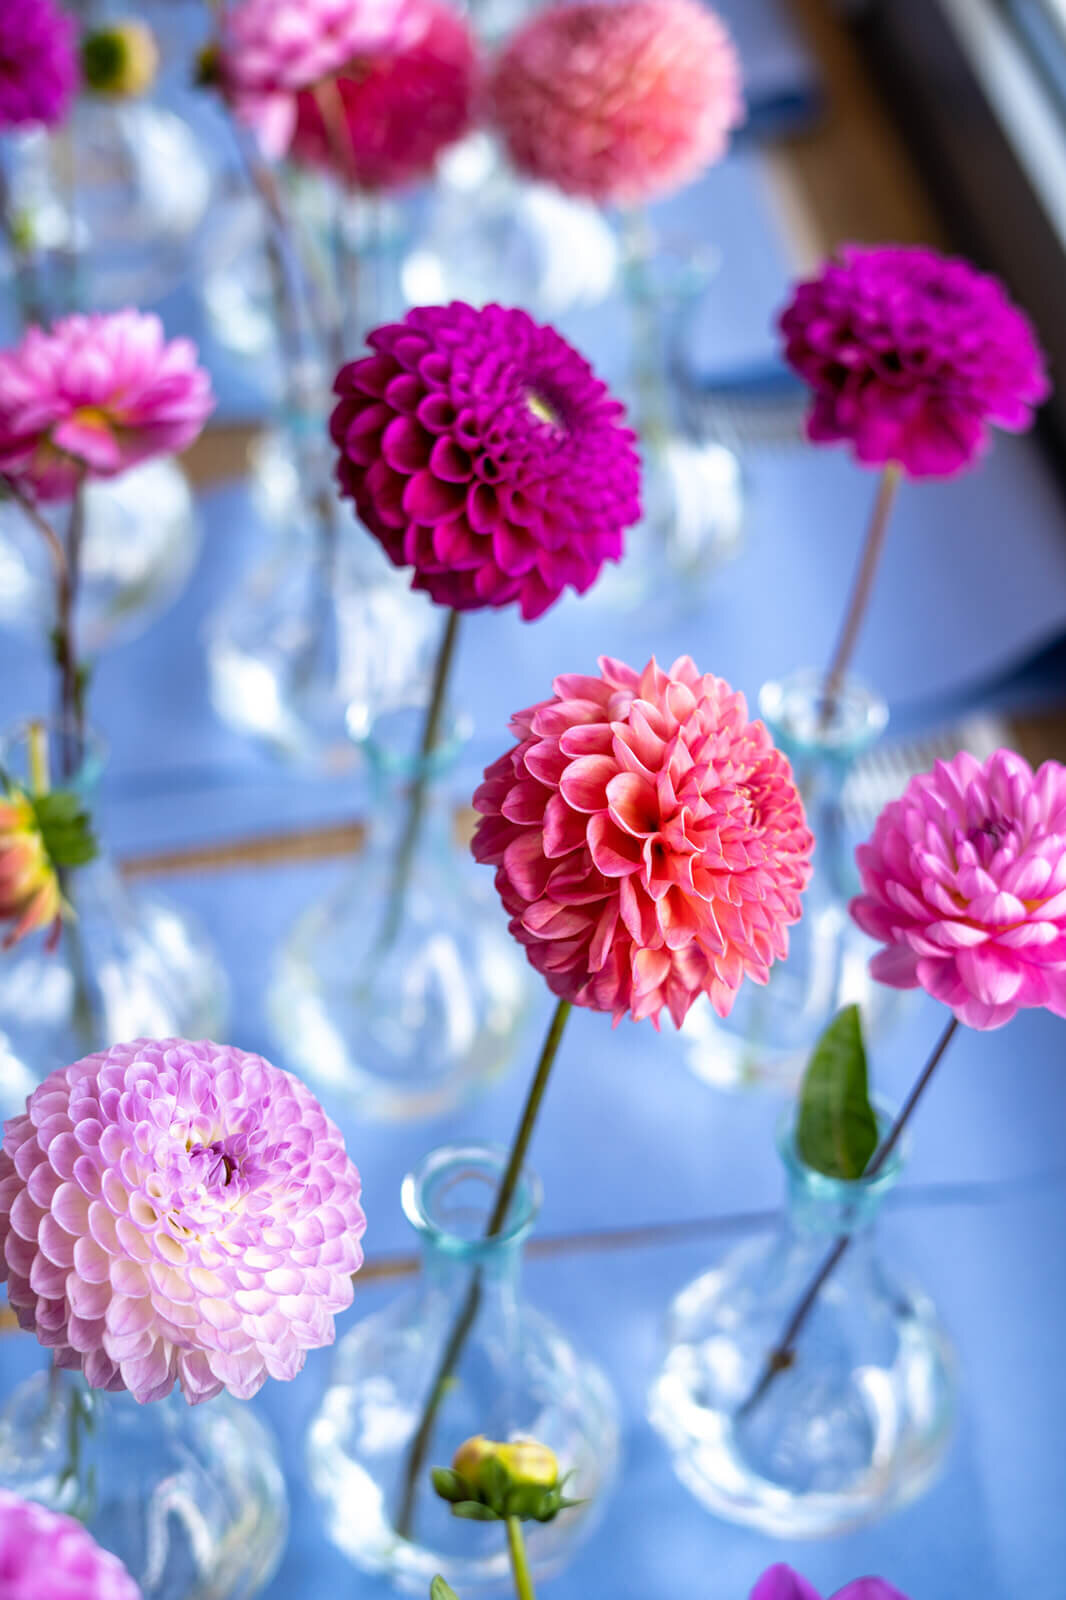 Pink Dahlias on wedding table at Thames Rowing Club